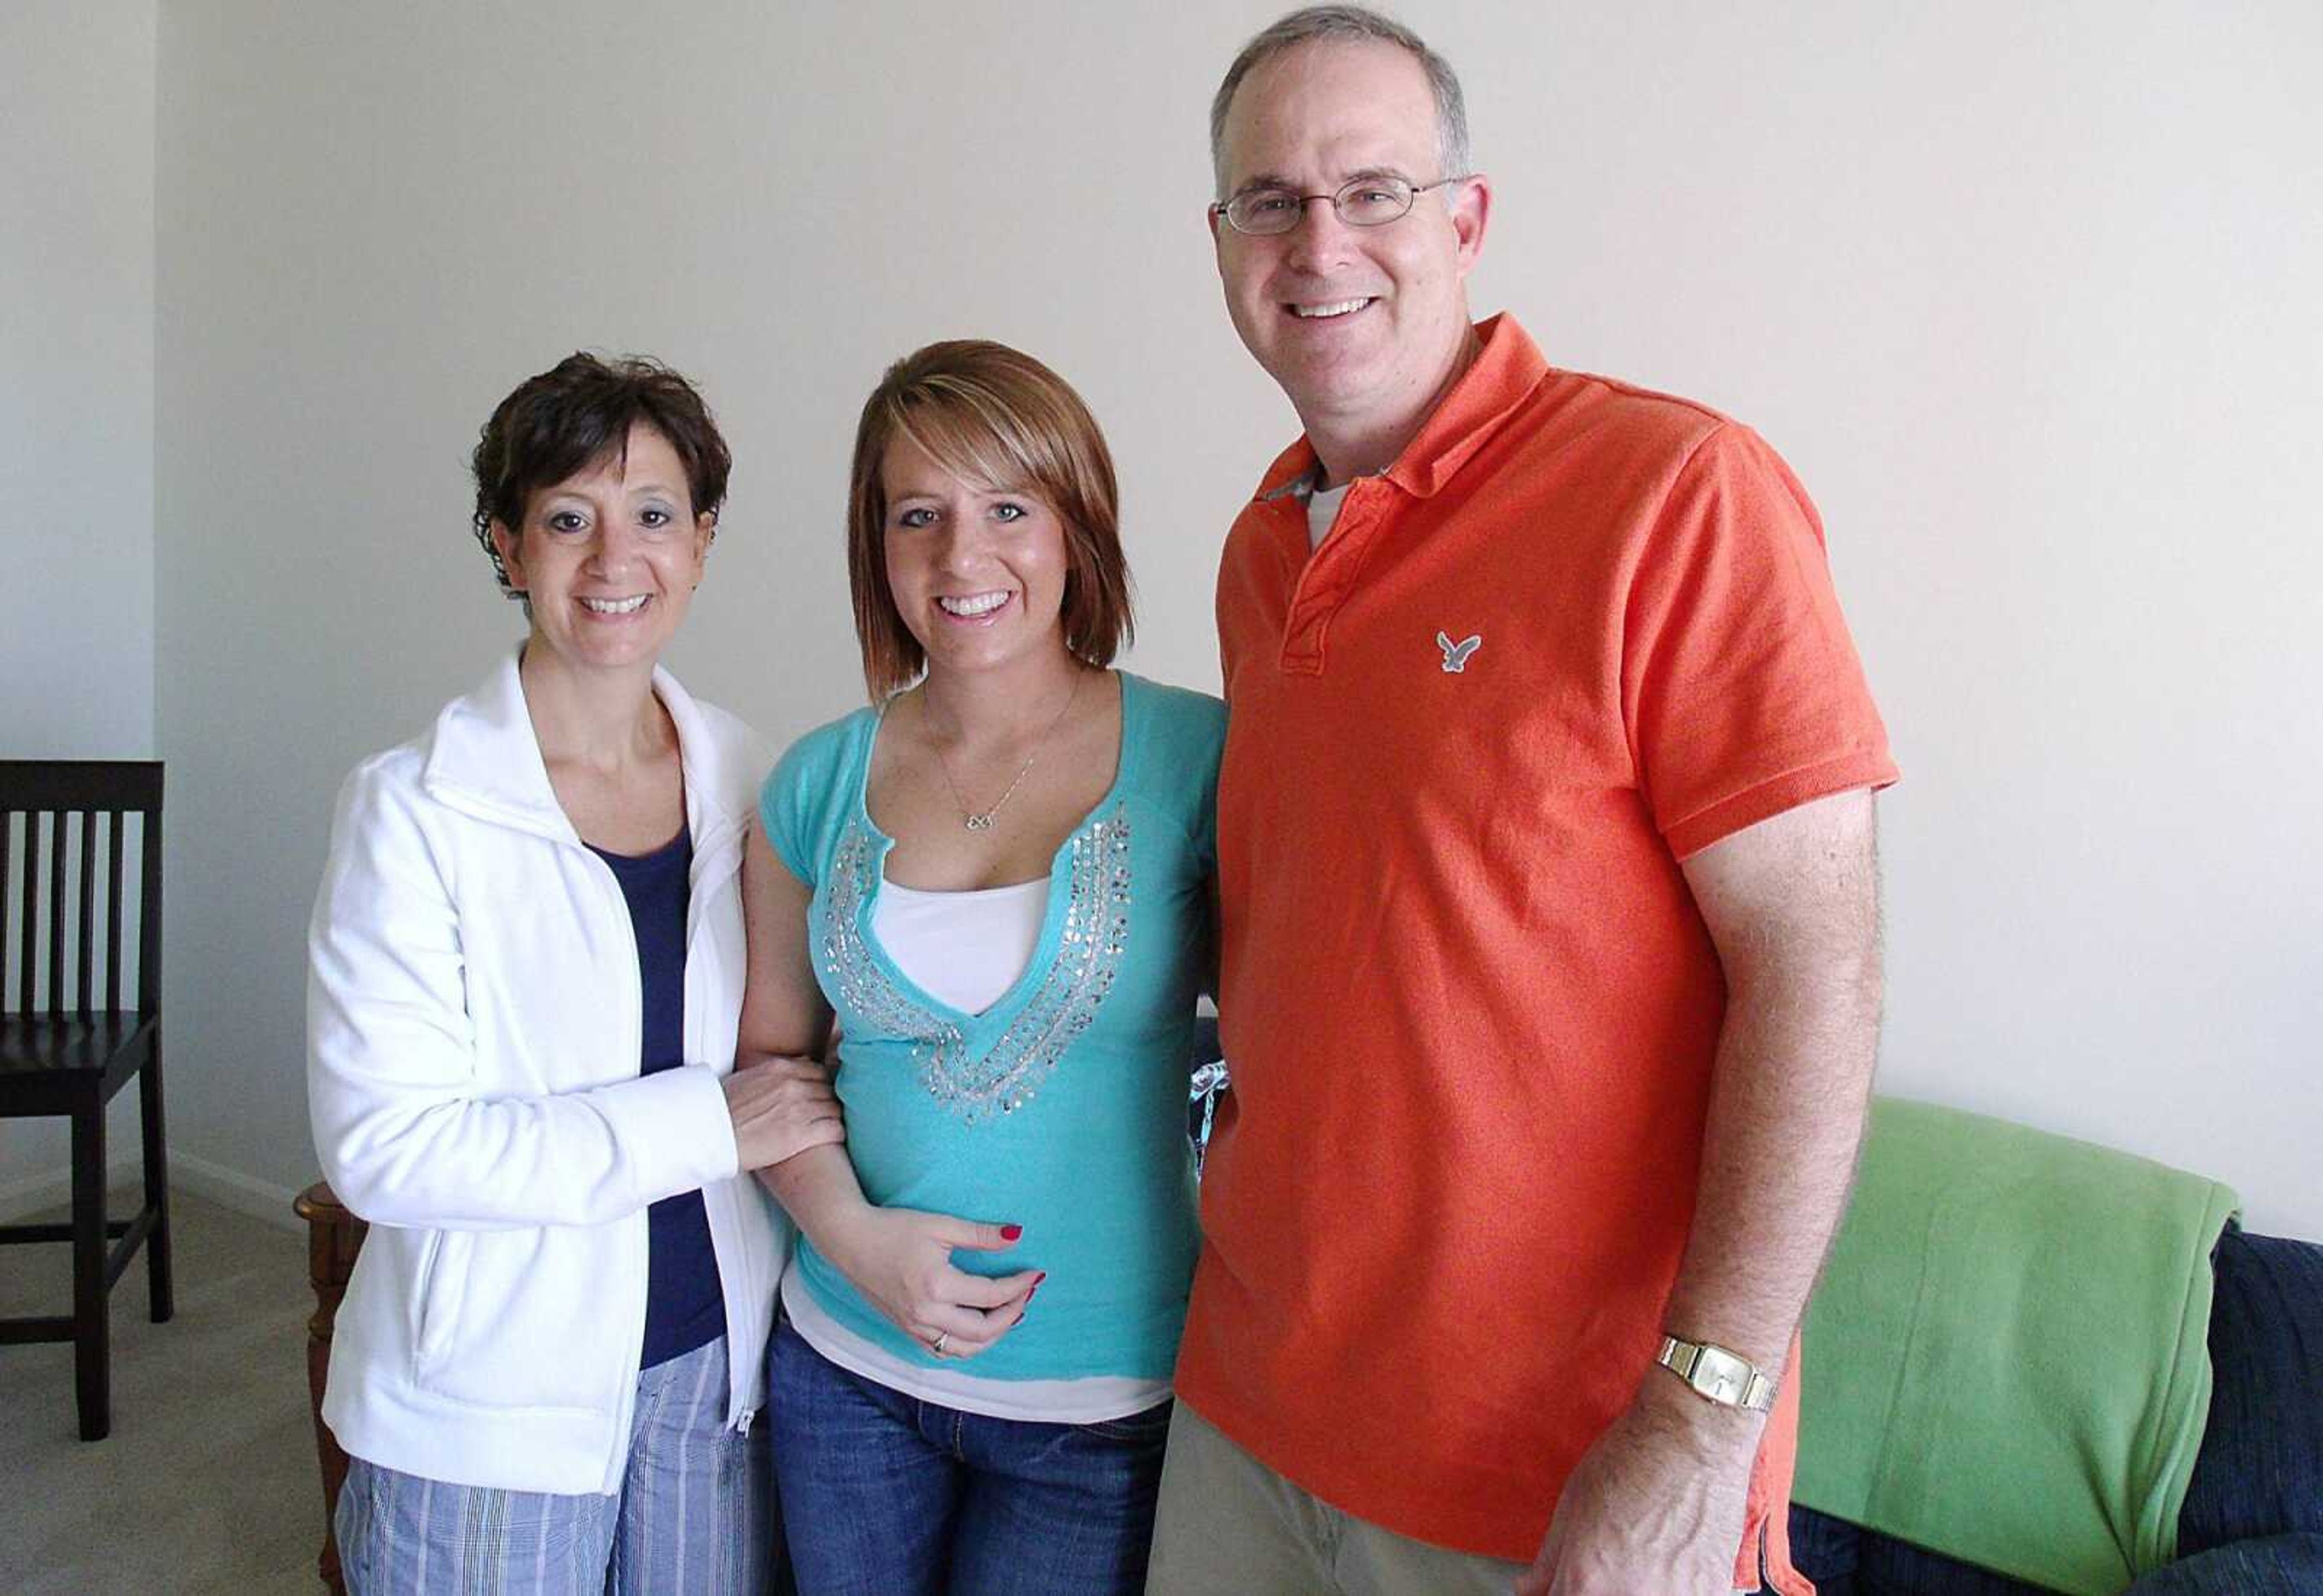 Elizabeth Fritch, shown here with her parents in her Stamford, Conn. apartment, is a production intern at NBC Universal's "The Maury Show" and "The Trisha Show", experienced some of the effects of Hurricane Sandy. Submitted photo